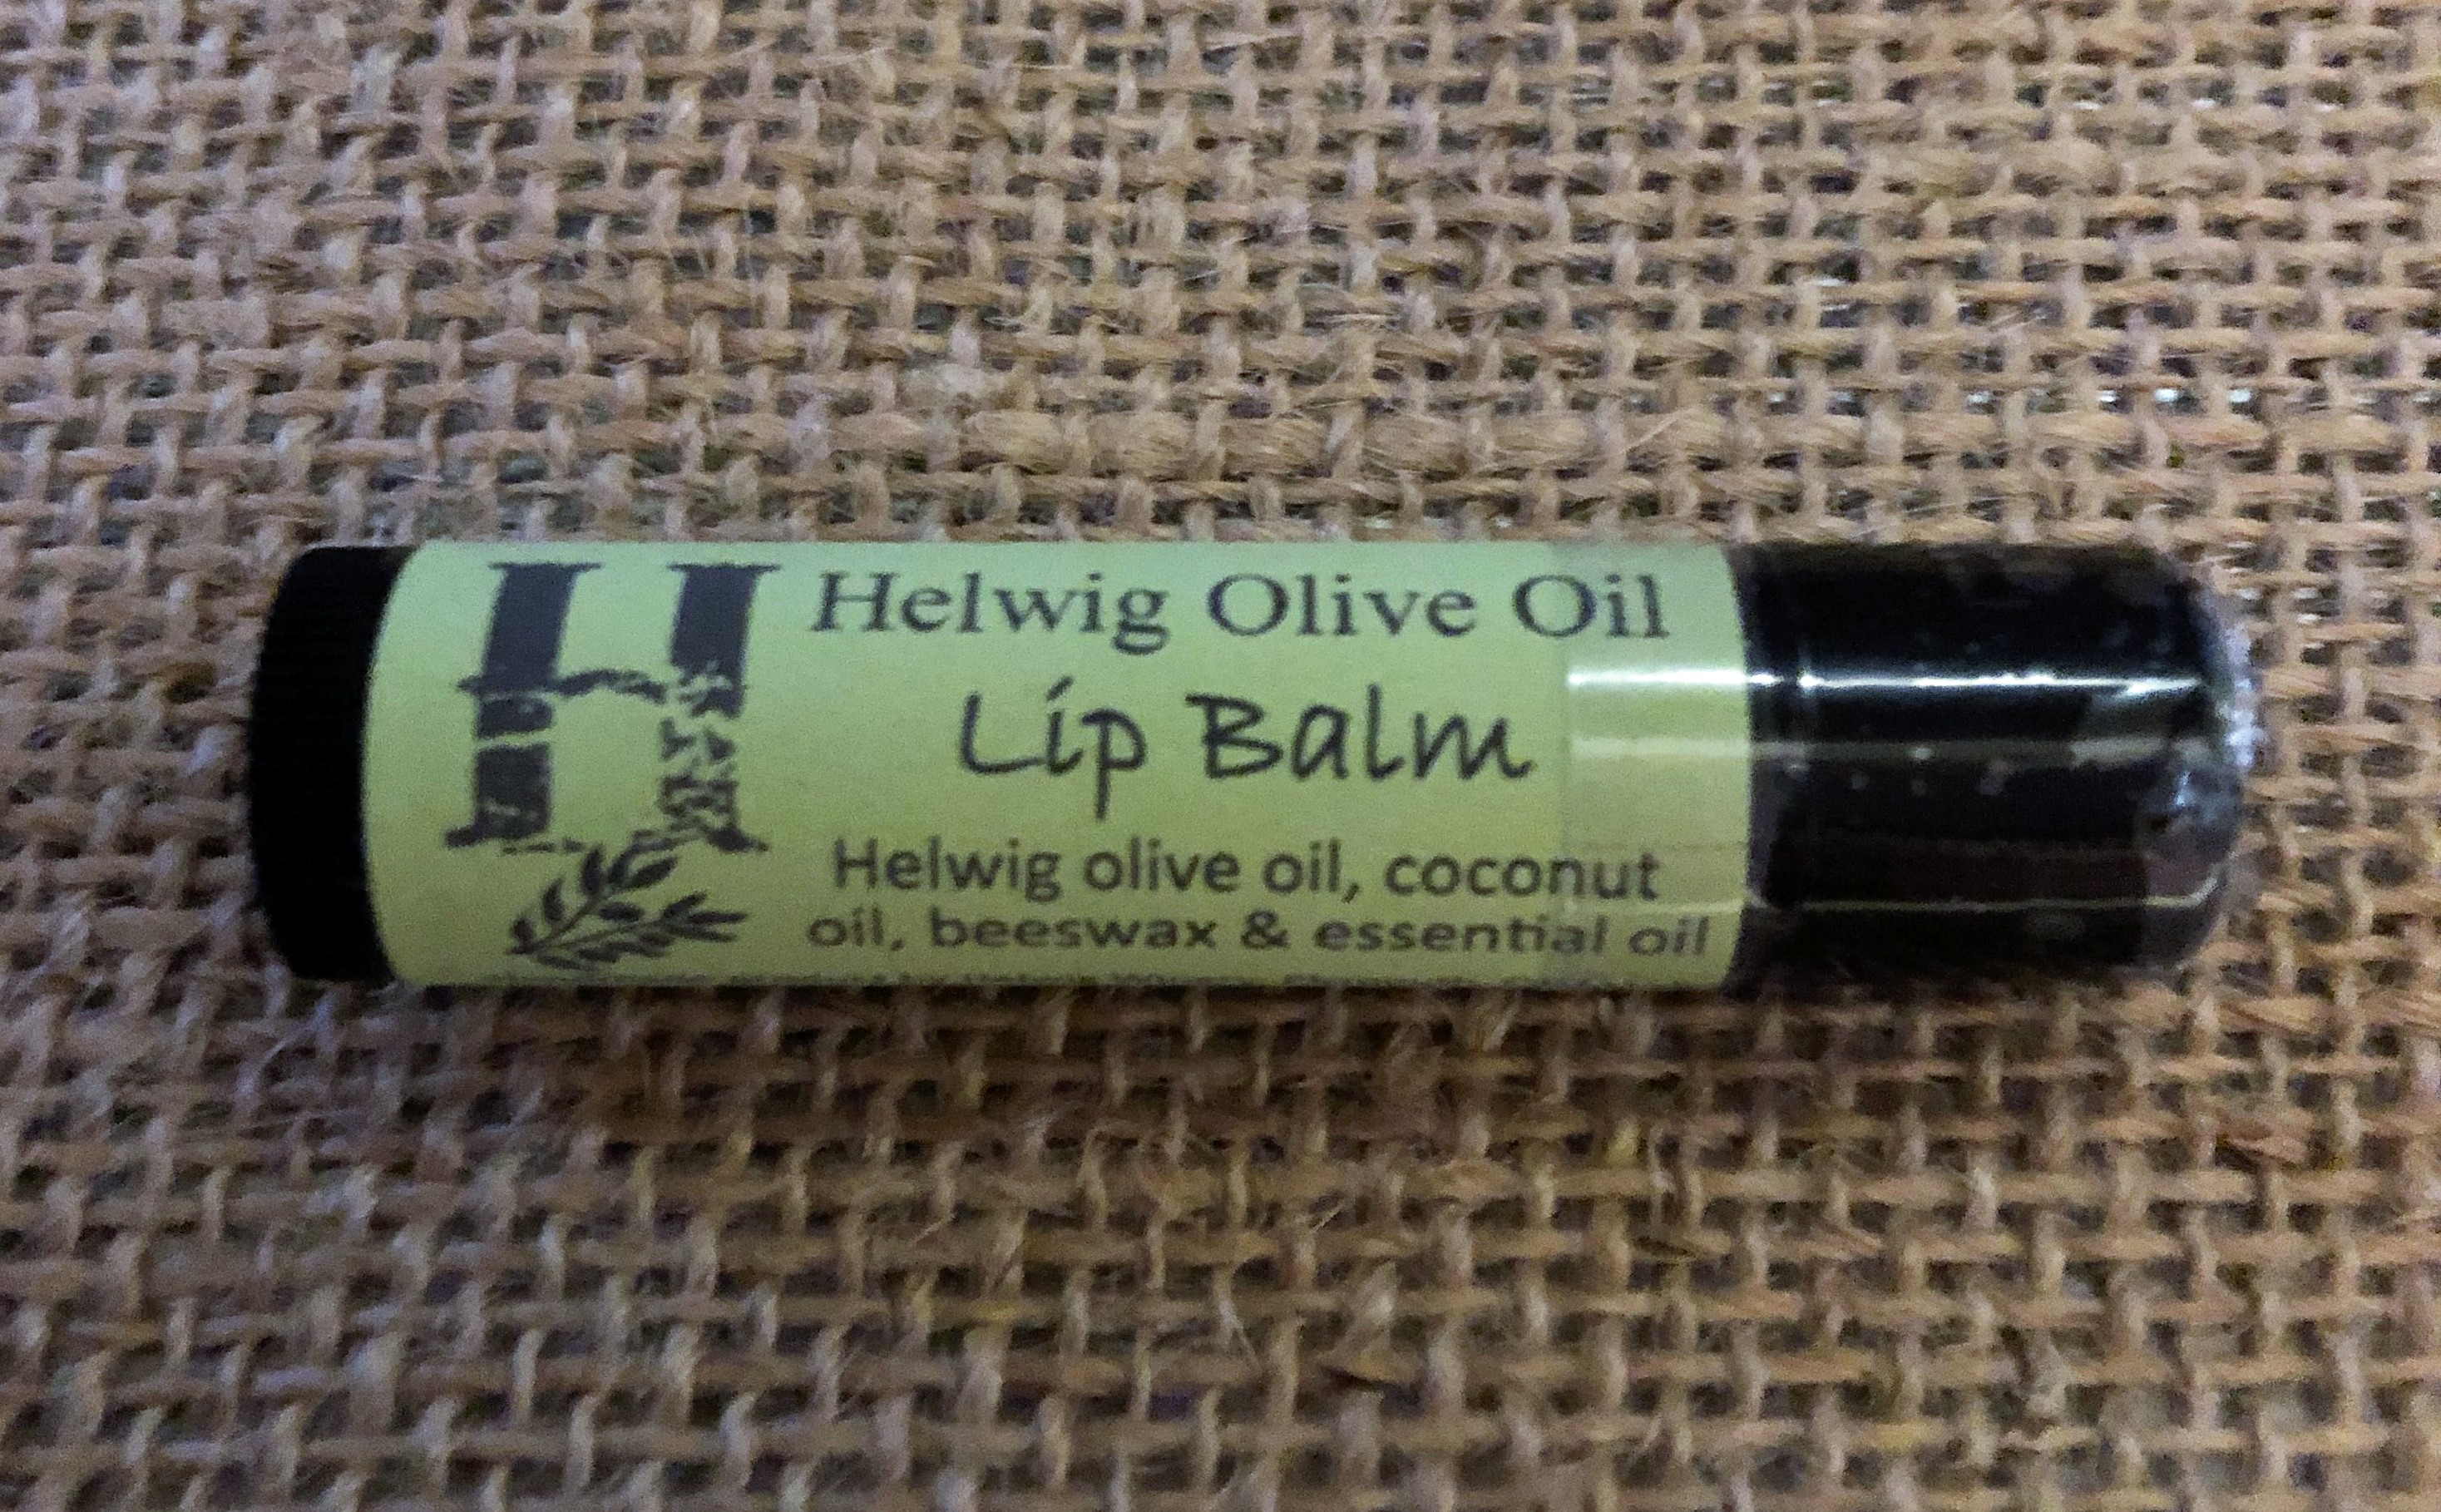 Product Image for Lip Balm Tubes